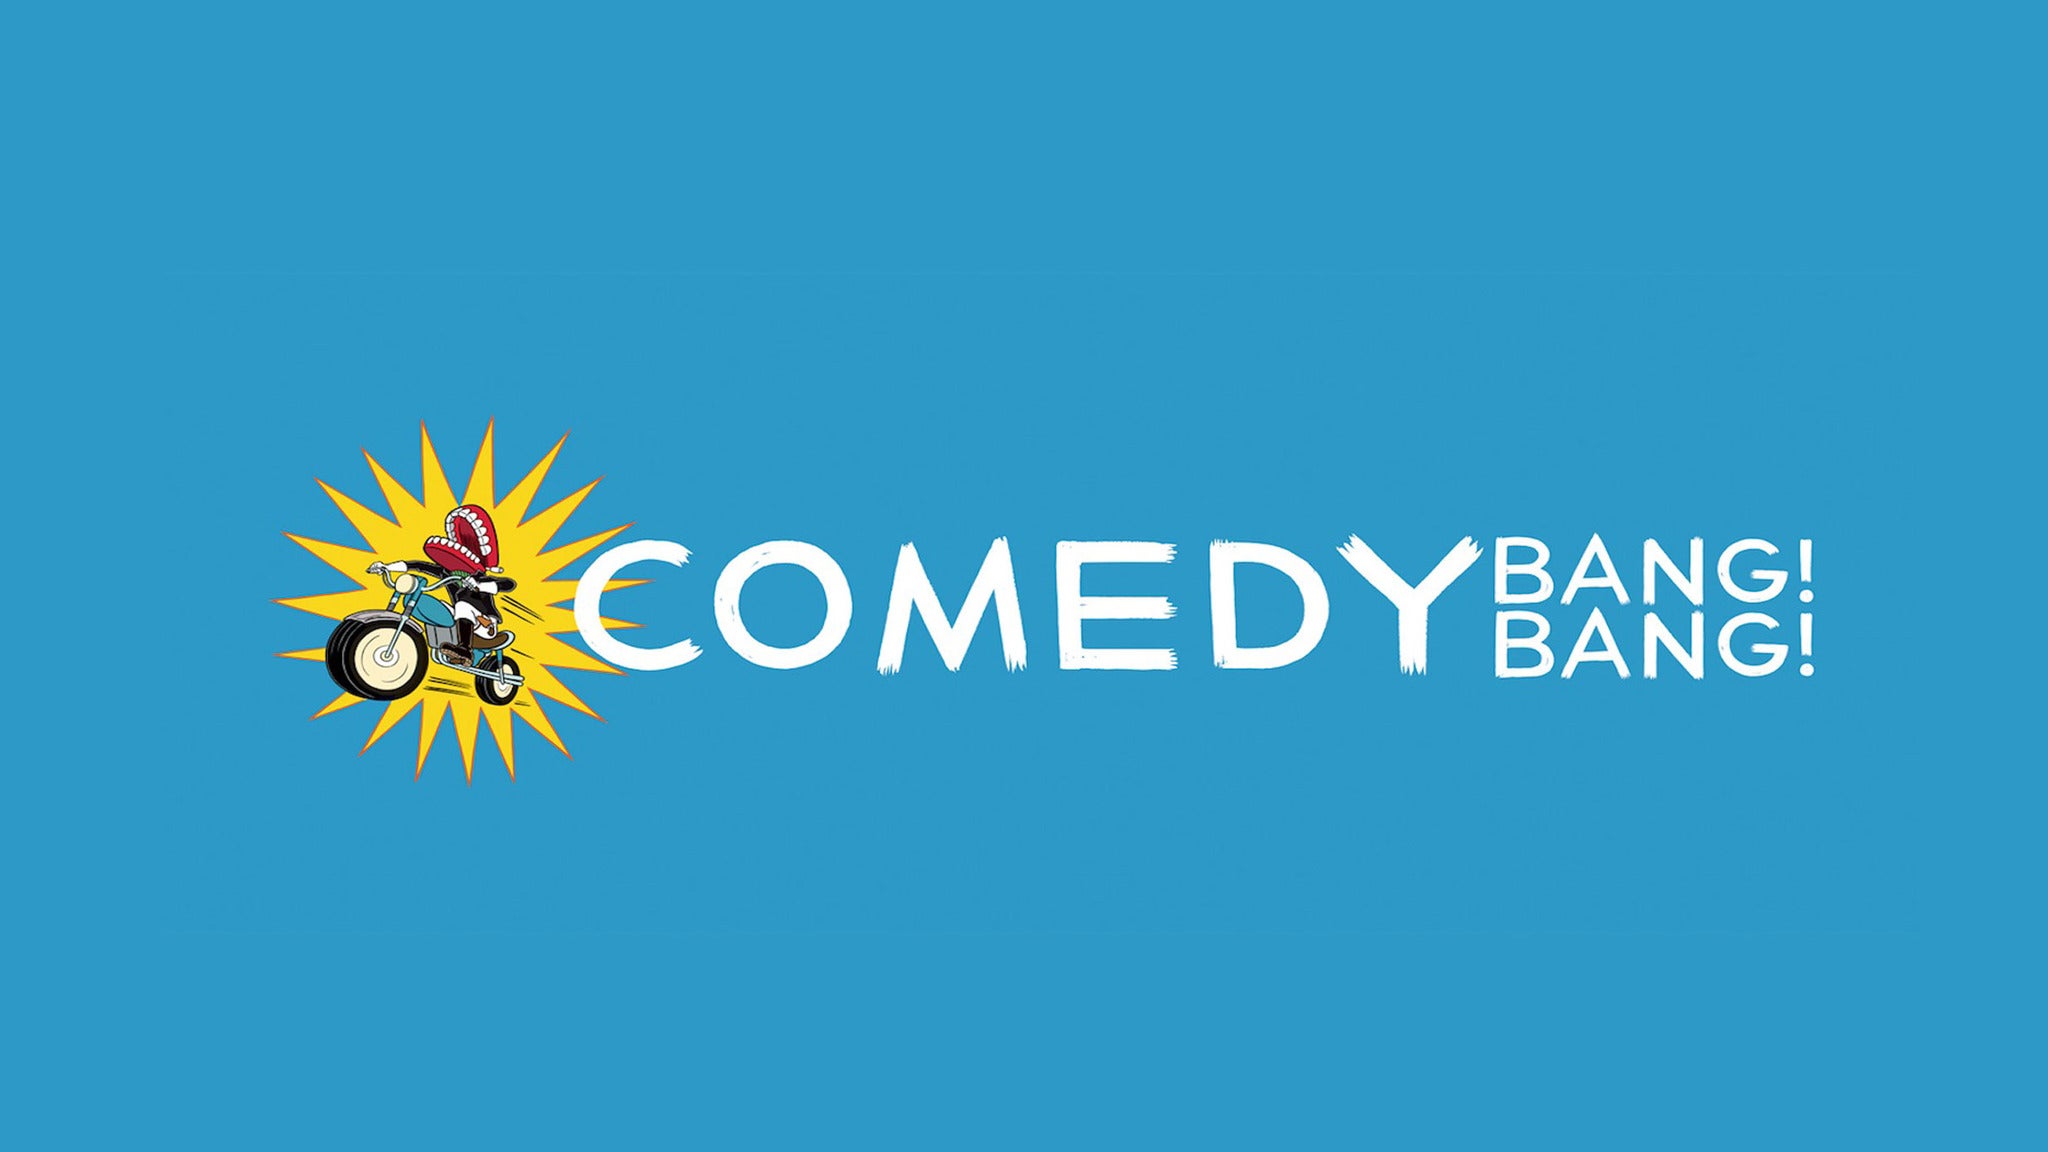 Comedy Bang! Bang! Live! Starring Scott Aukerman w/ guests in Washington promo photo for LN / Venue presale offer code